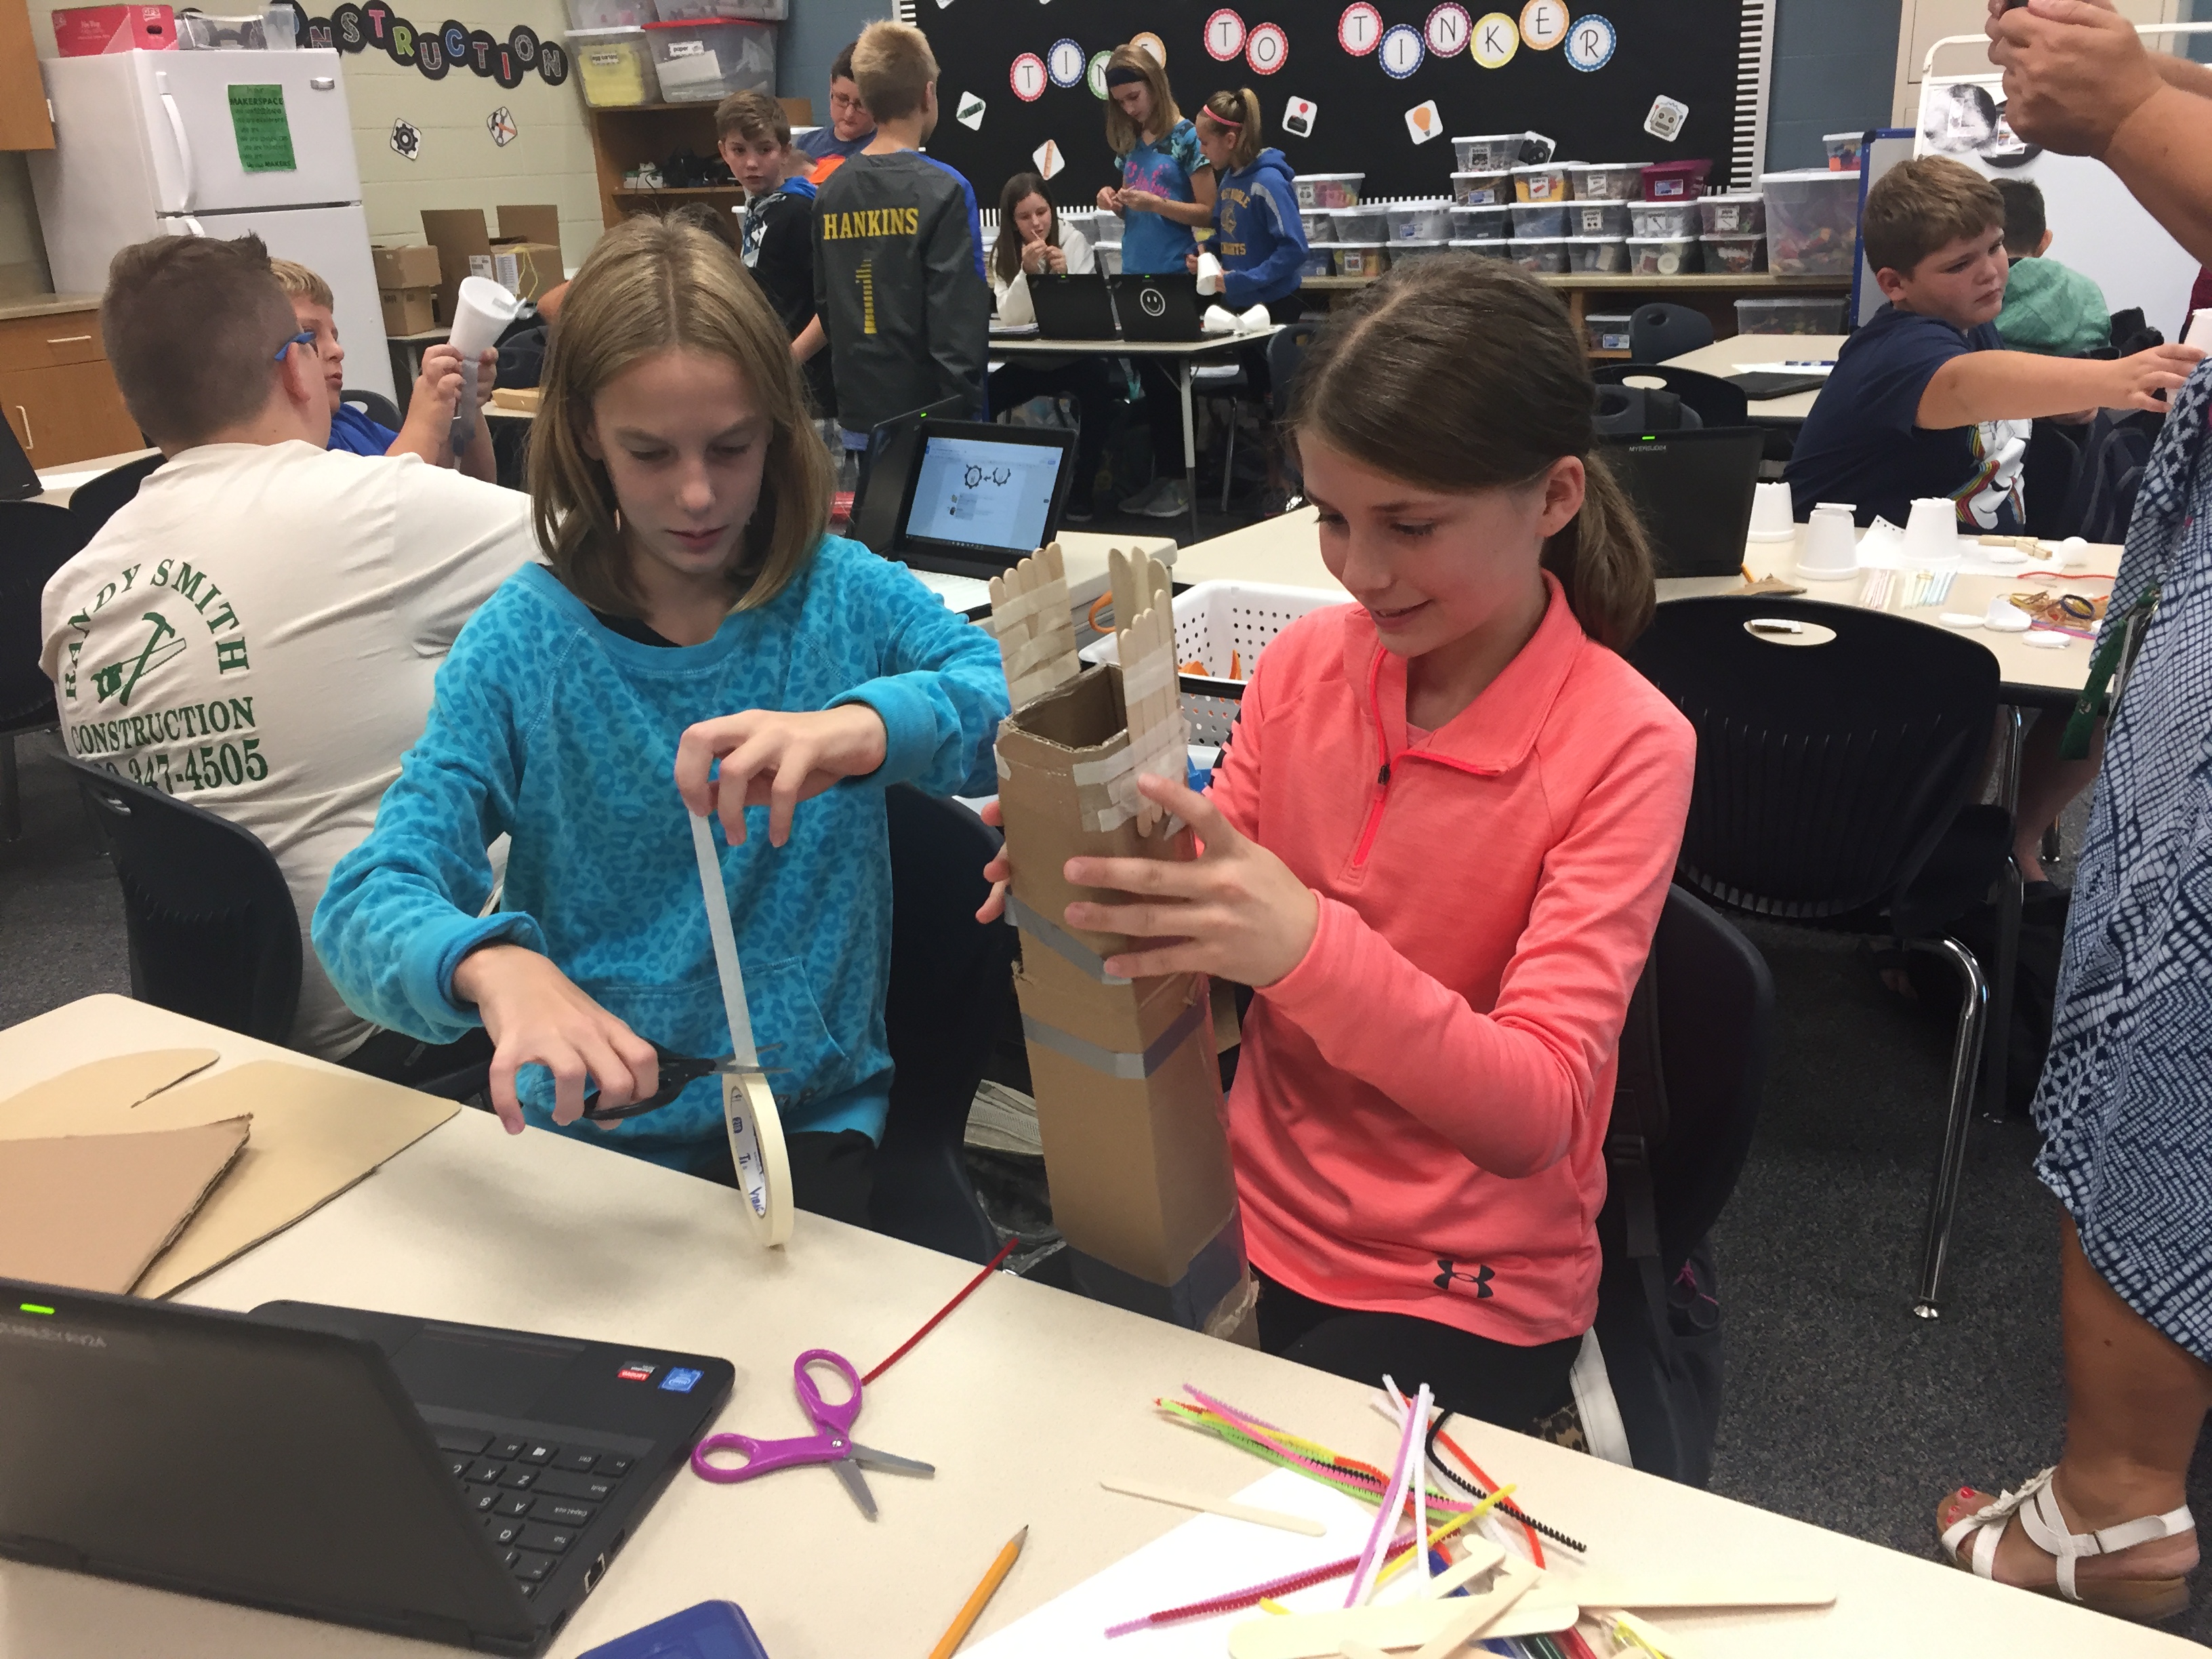 Two students tape together a project made of popsicle sticks and cardboard.